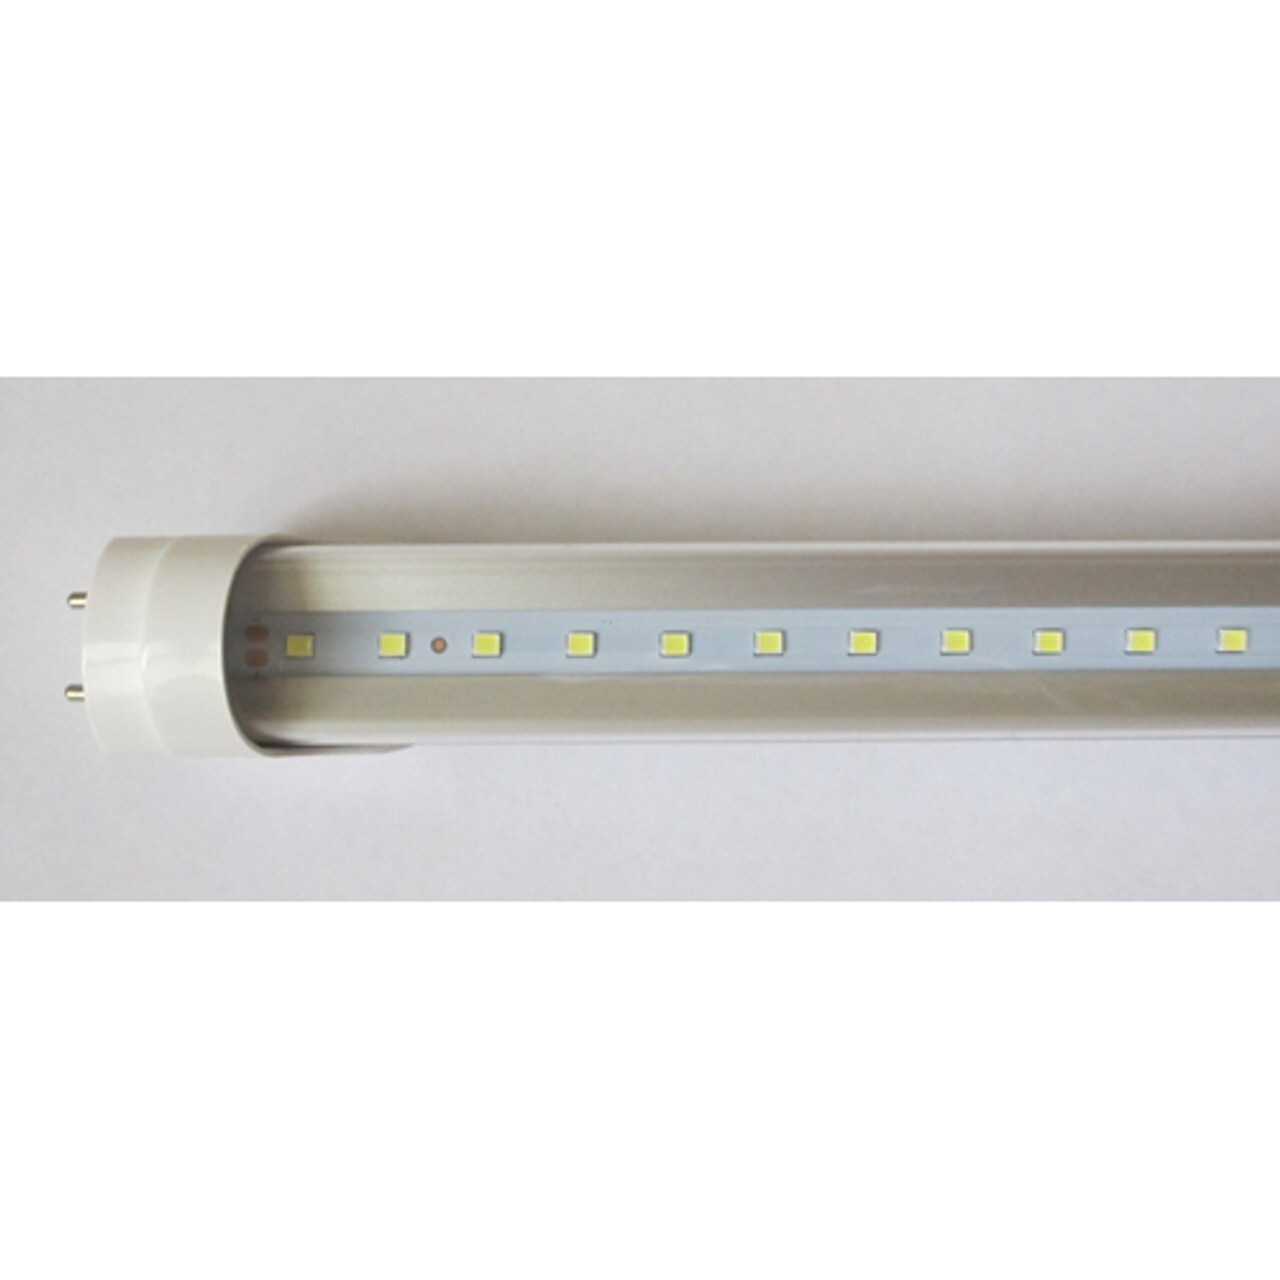 How many watts is a 4ft LED tube? – LEDMyPlace